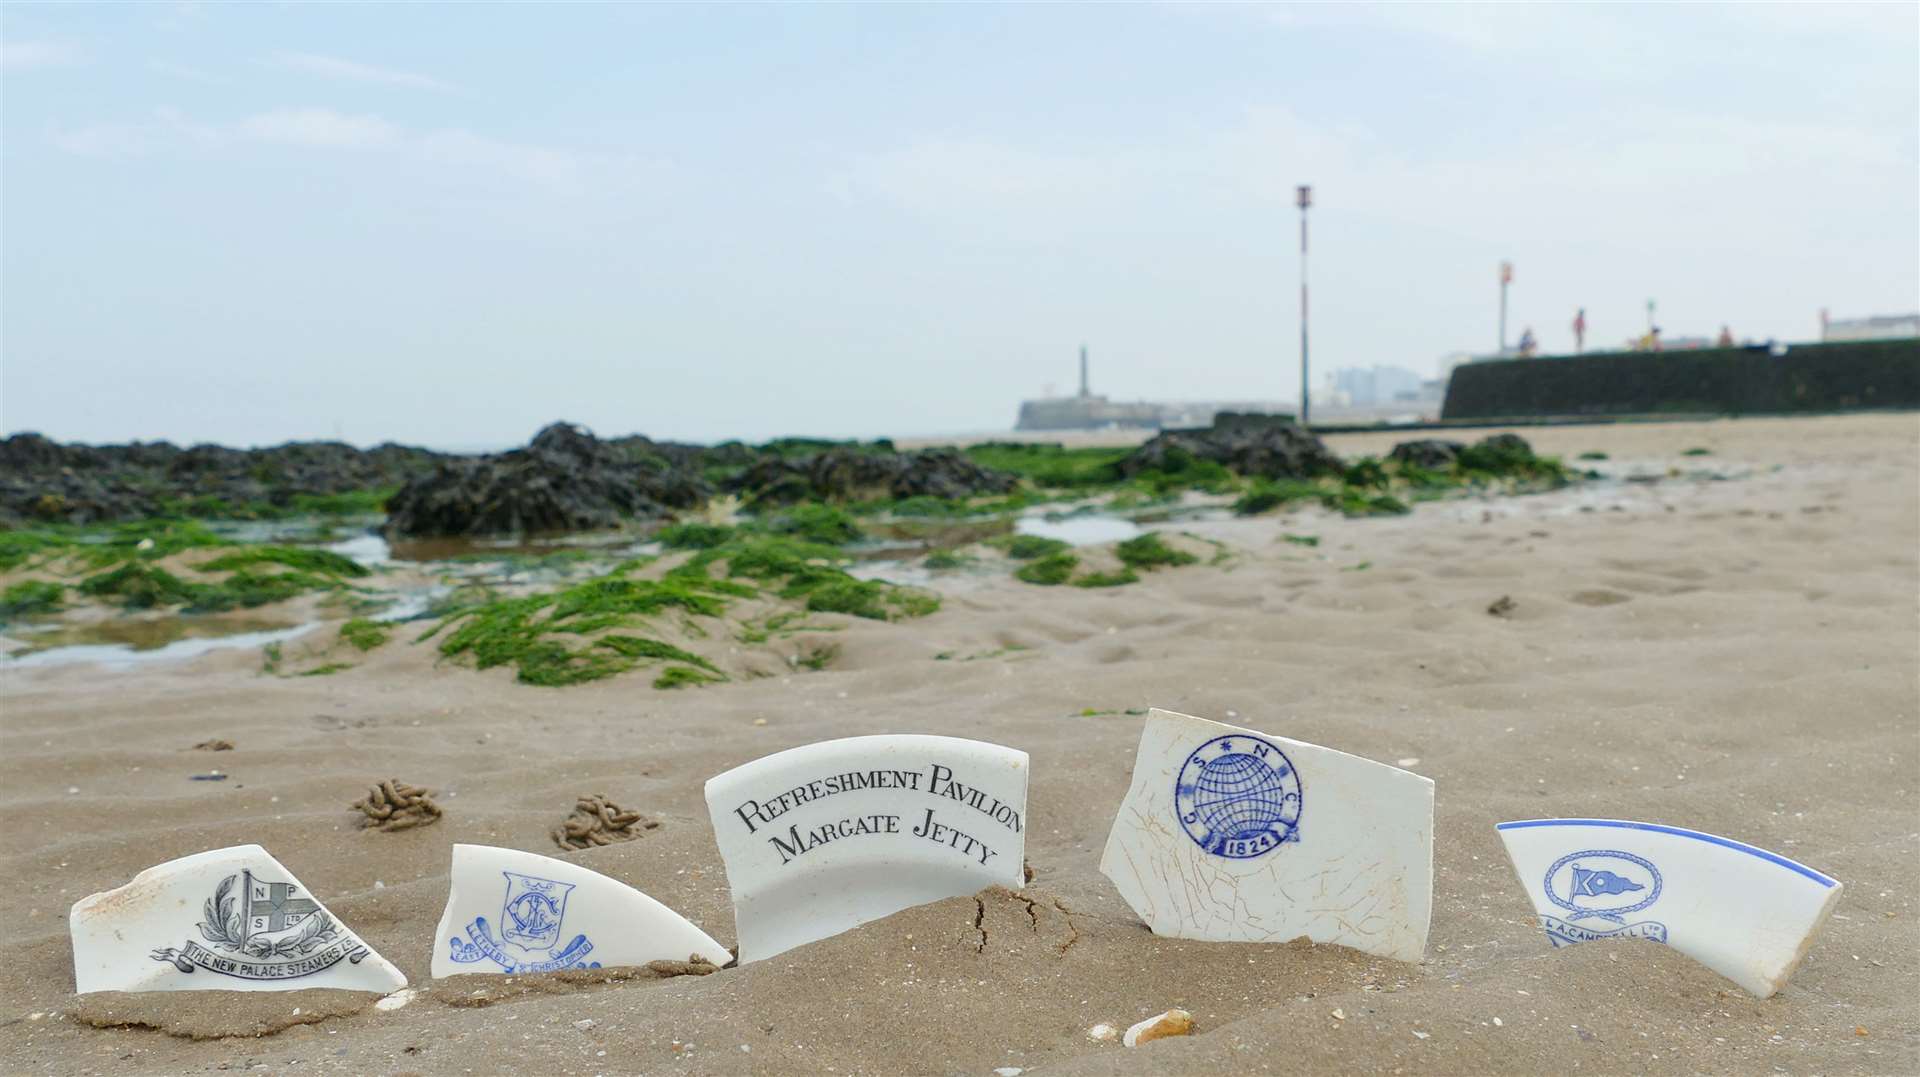 Crockery was often thrown overboard by passengers on steam liners that used to ferry people from London to the Kent coast. Now Frank enjoys picking up the historic shards that wash up around Margate. Picture: Frank Leppard